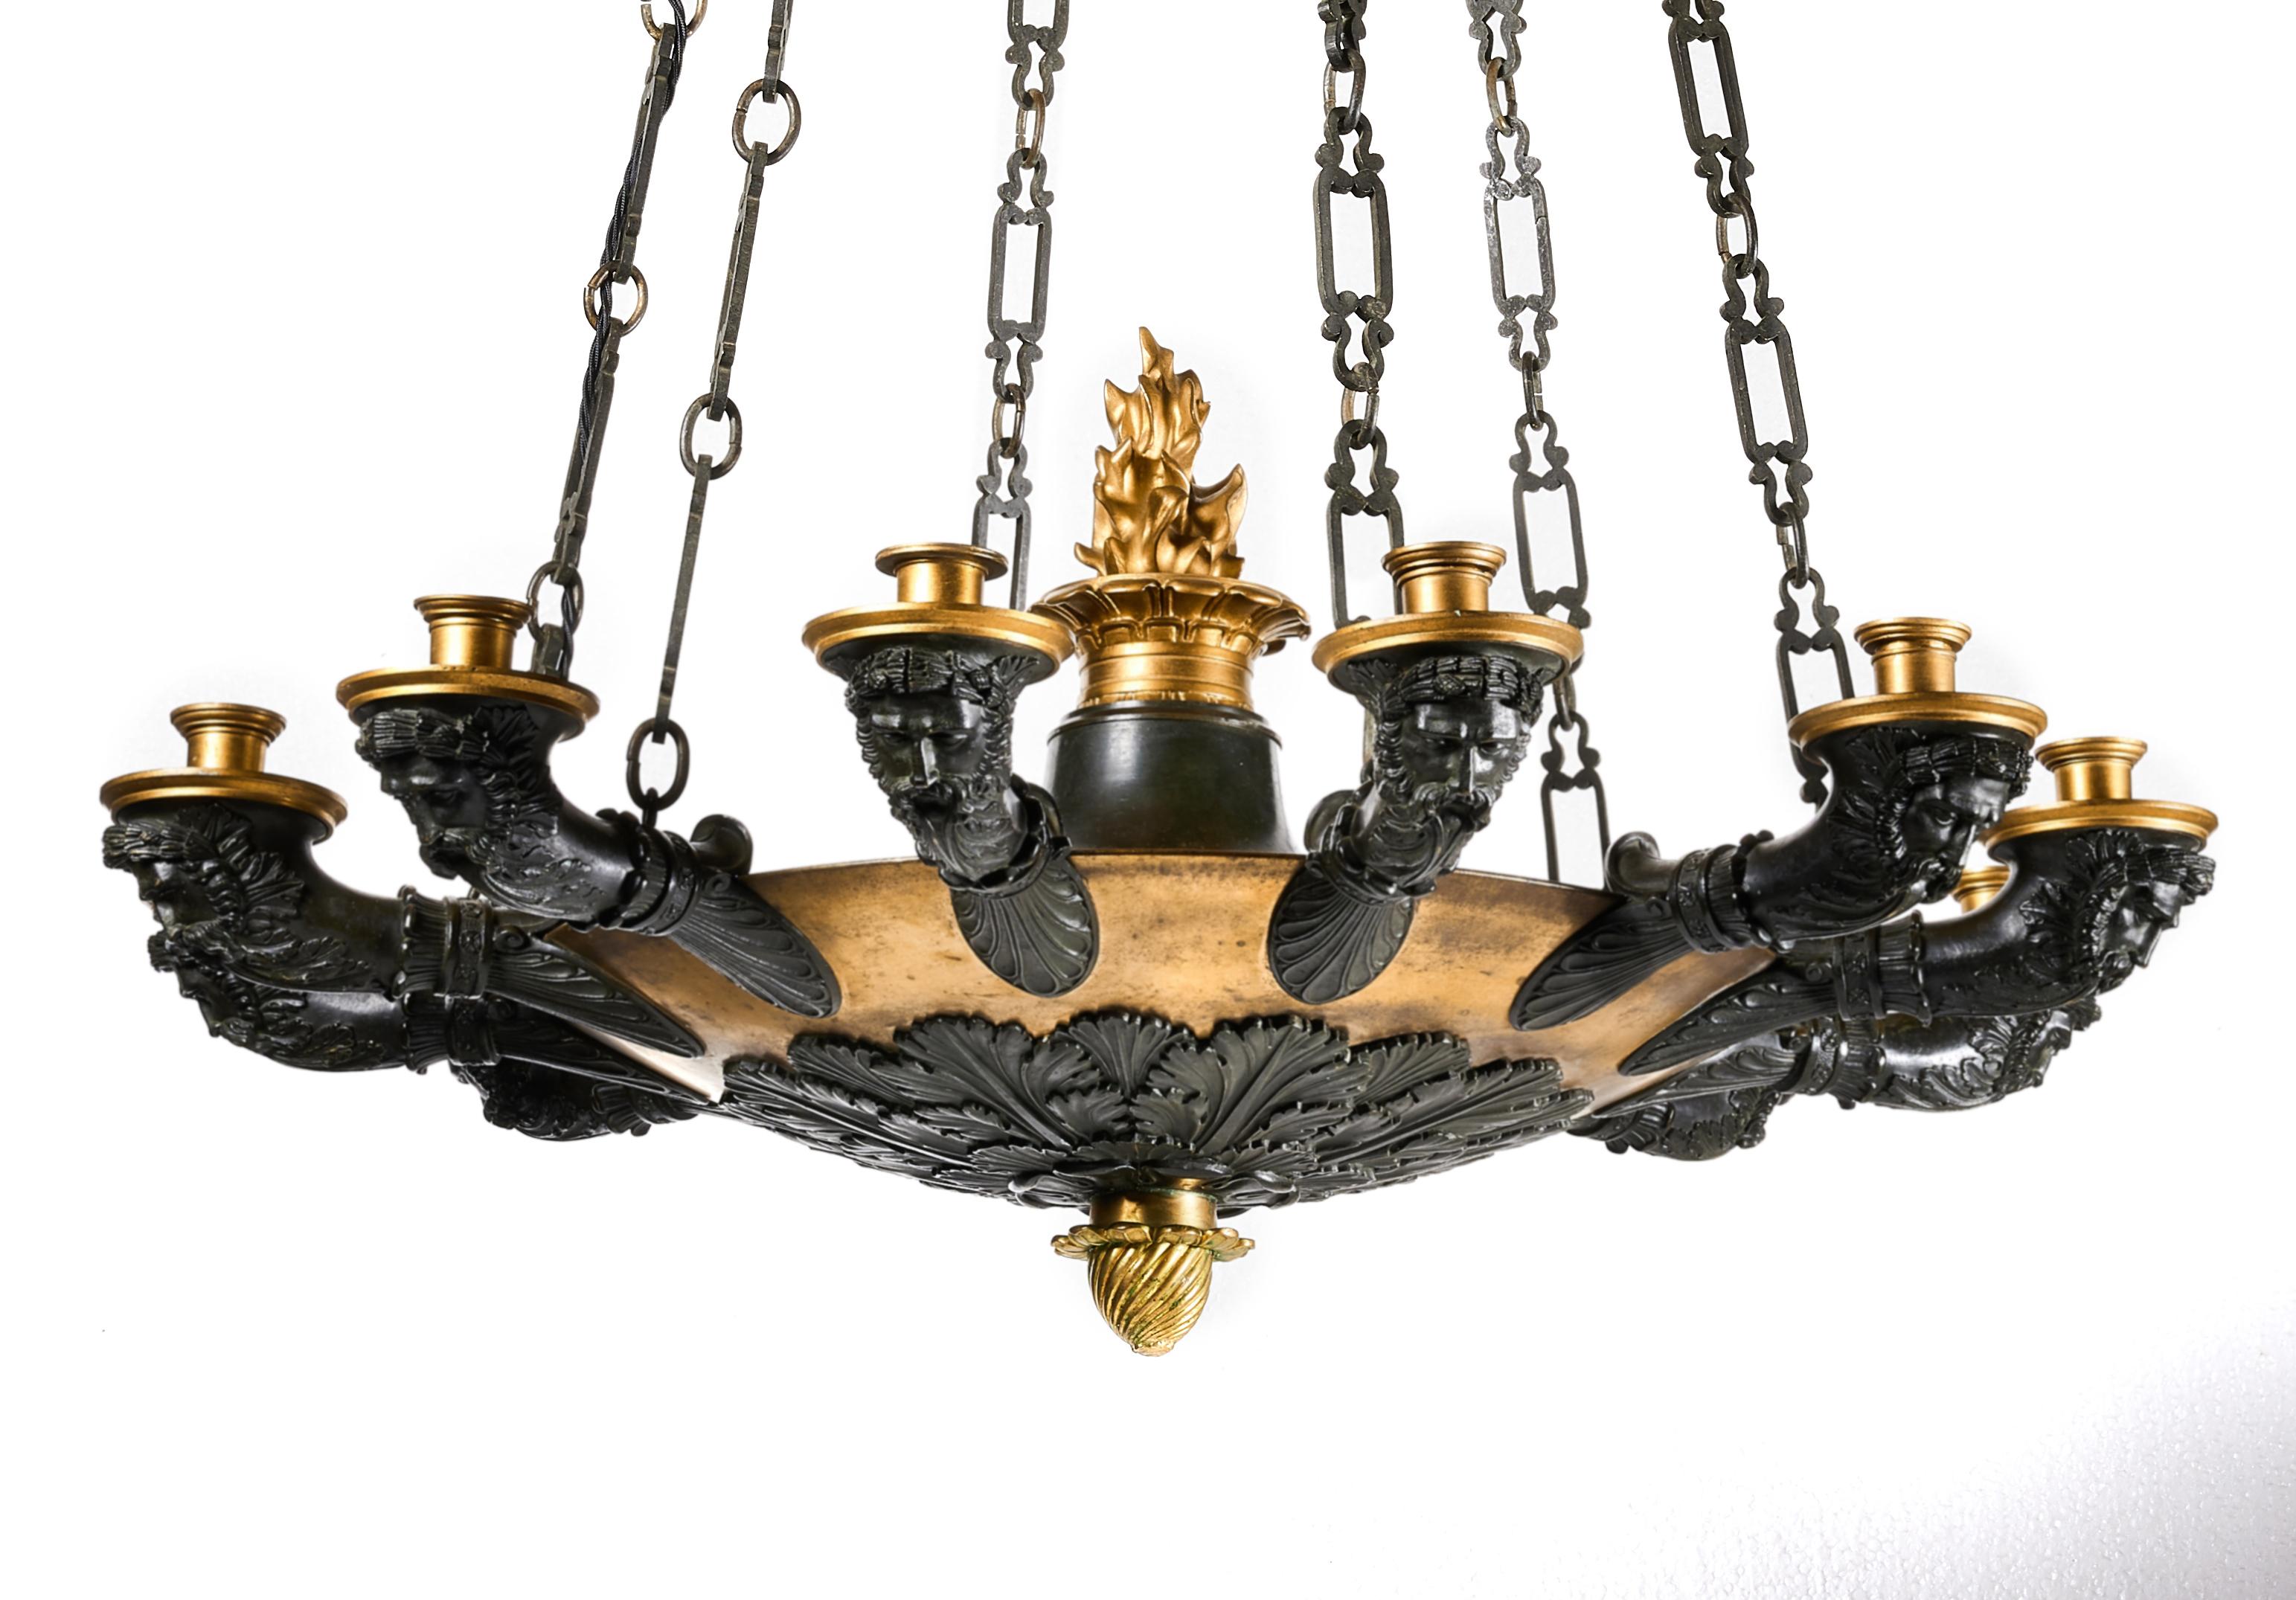 A superb quality original patinated and gilt bronze French Empire twelve-branch chandelier.

French, circa 1820.

In excellent original condition having a fine patina to the bronze and gilt work this wonderful 12 branch French Empire chandelier